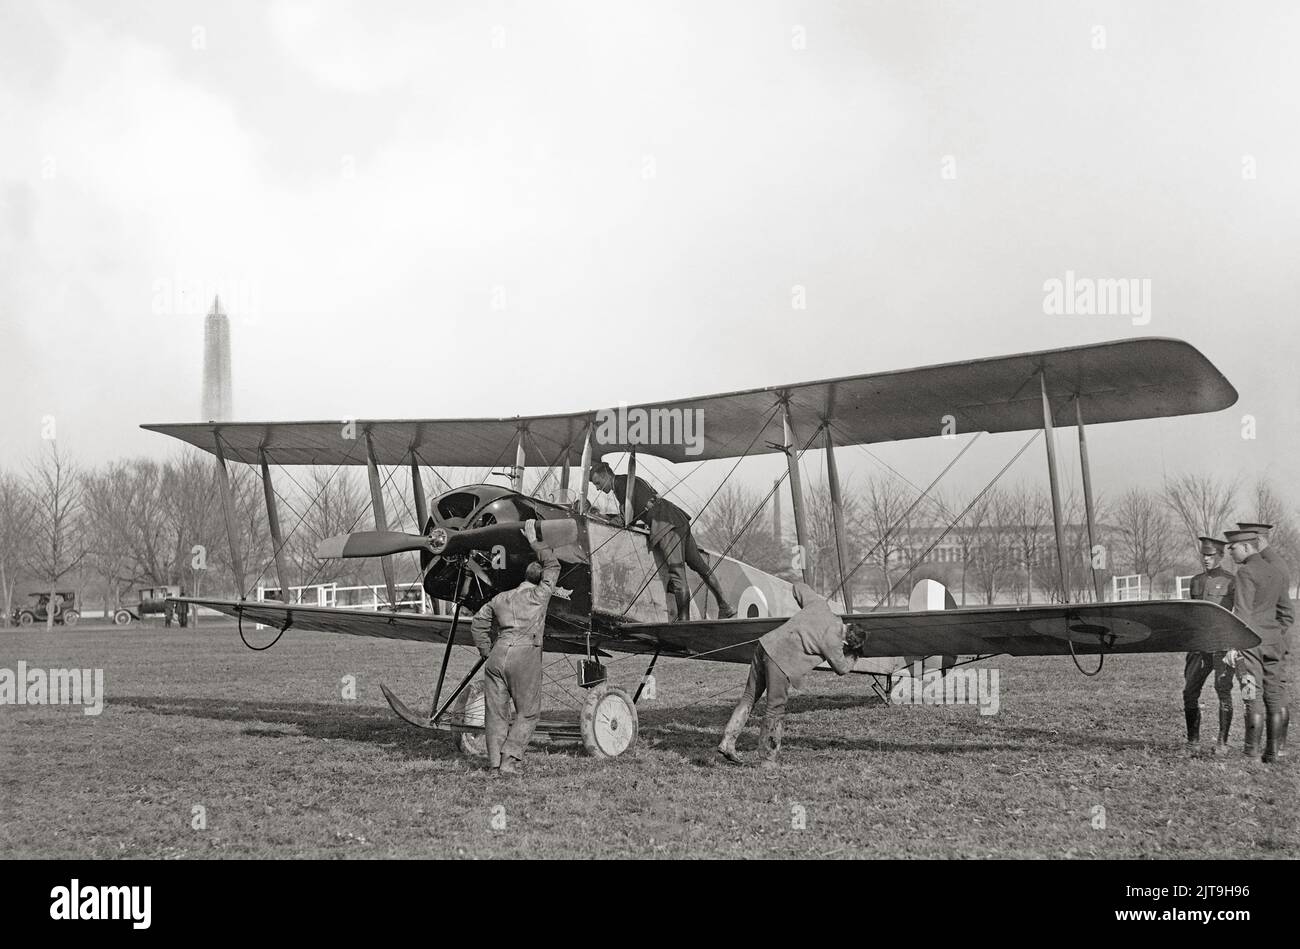 A demonstration of the Avro 504K  Training biplane aircraft, used during the  First World War, by Colonel Charles. E. Lee at the Polo Ground in New York, United States of America. Stock Photo